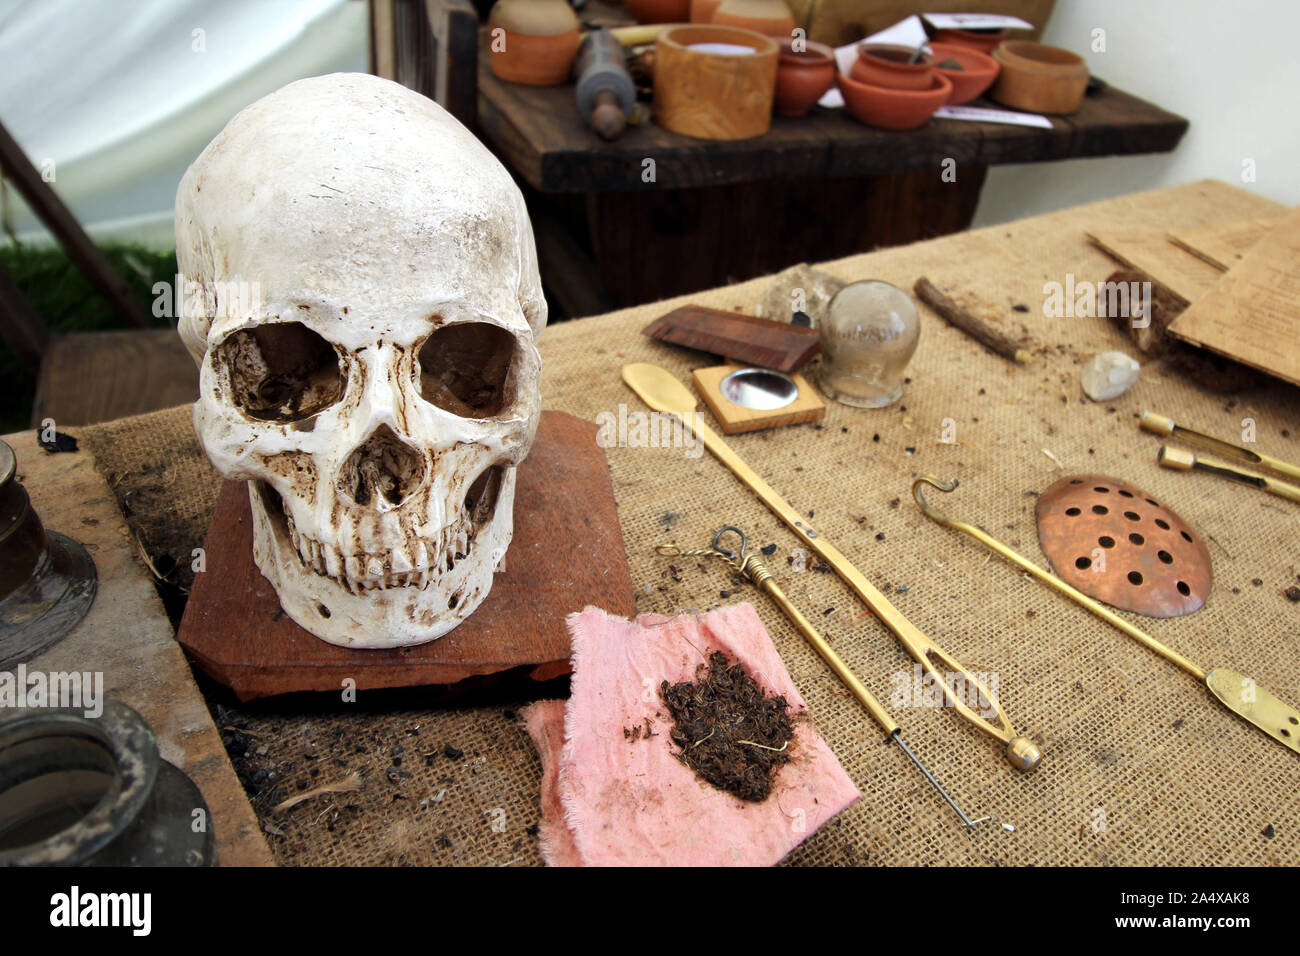 Old medieval apothecary or chemists, with skull and various old medical instruments, herbs and pots Stock Photo